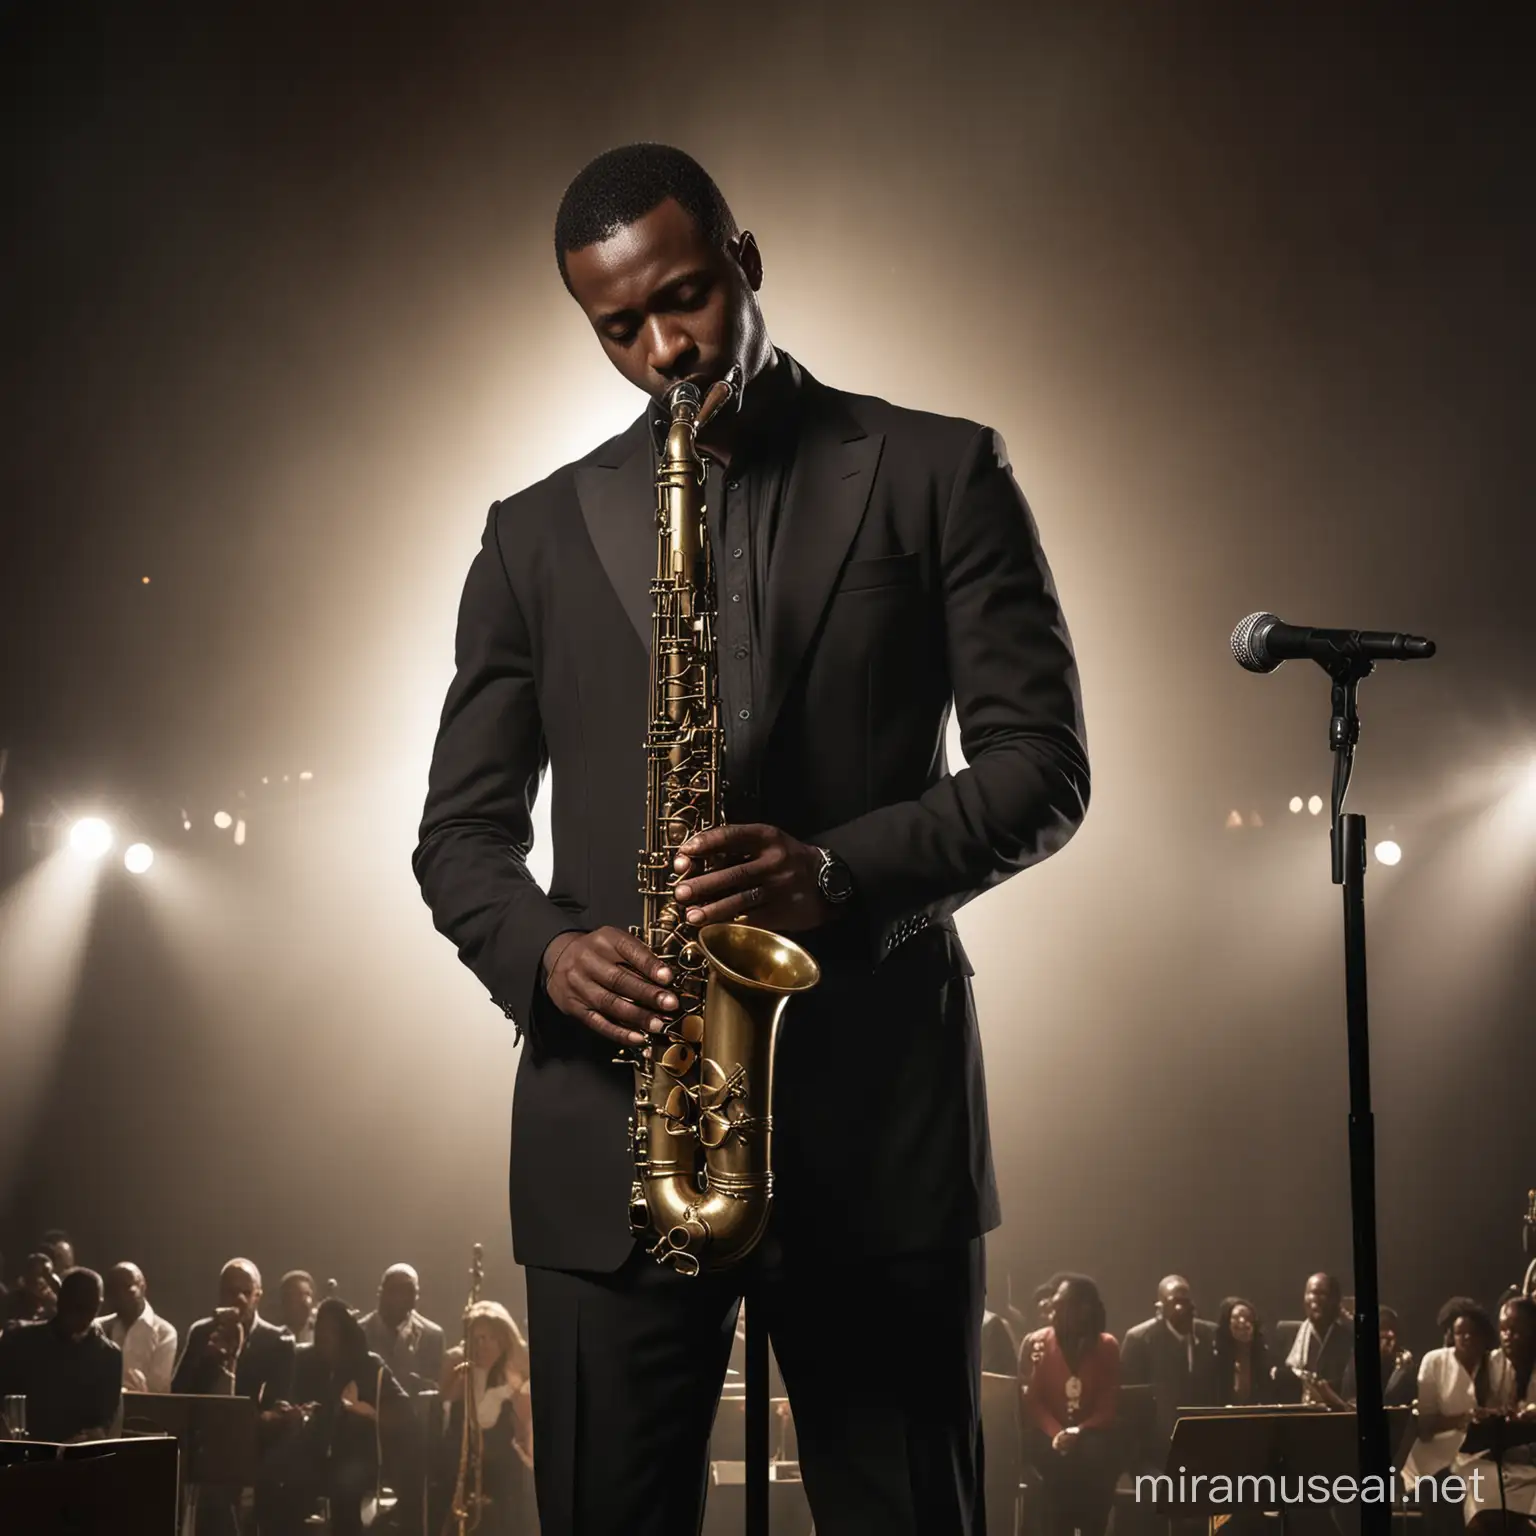 CREAT A DIGITAL PHOTO OF A black African man standING tall at 5 feet 10 inches, skillfully playing a real tenor saxophone in an awe-inspiring worship setting, WITH WORSHIPPERS SHOWING REFERENCE